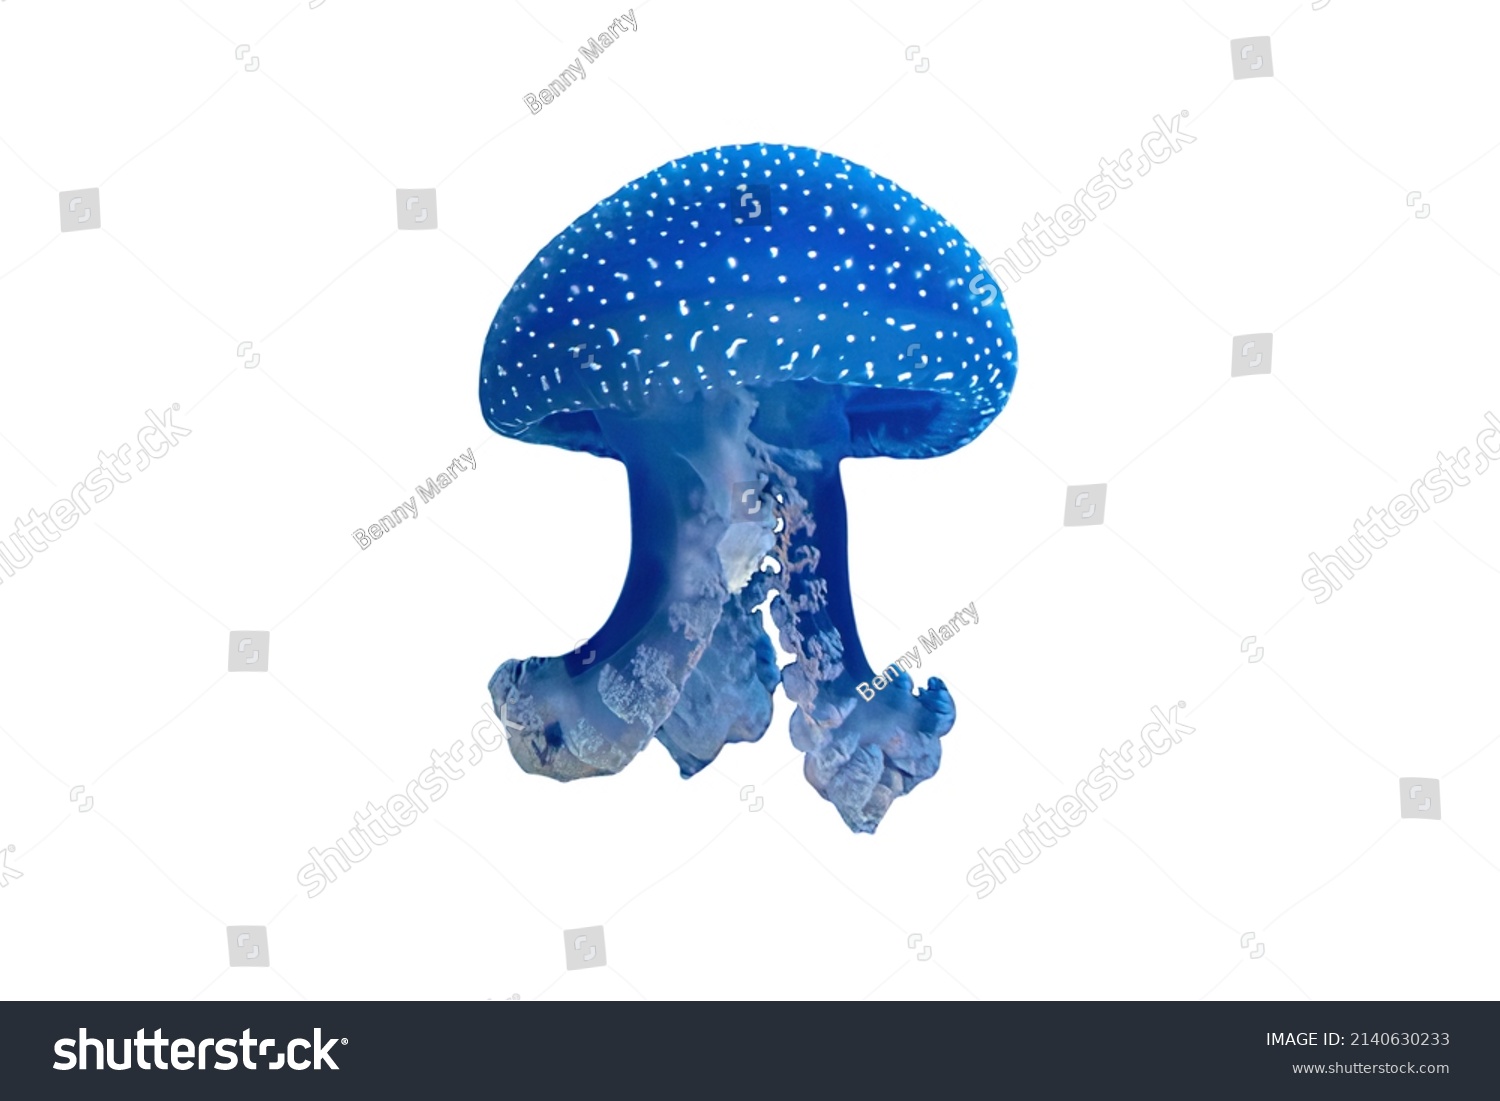 Australian spotted Jellyfish floating in the water isolated on white background. Phyllorhiza punctata species living in tropical waters of the western Pacific from Australia to Japan. #2140630233